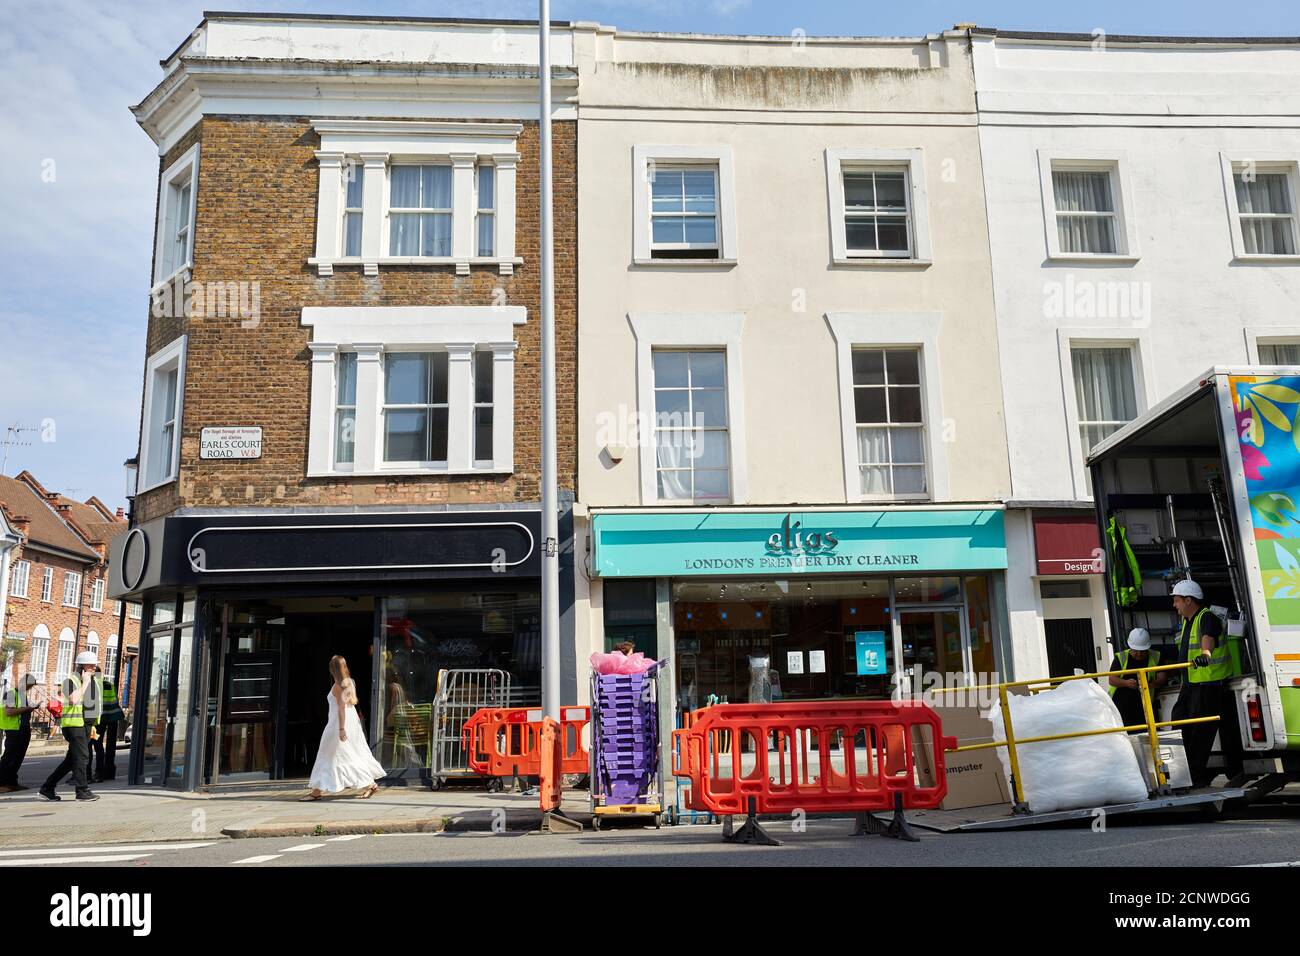 London, UK. - 16 Sept 2020: A woman stares into the Pizza Express on Earl's Court Road as workmen remove the contents. The Kensington restaurant is one of 73 the company has shut due to a downturn caused by the coronavirus pandemic. Stock Photo